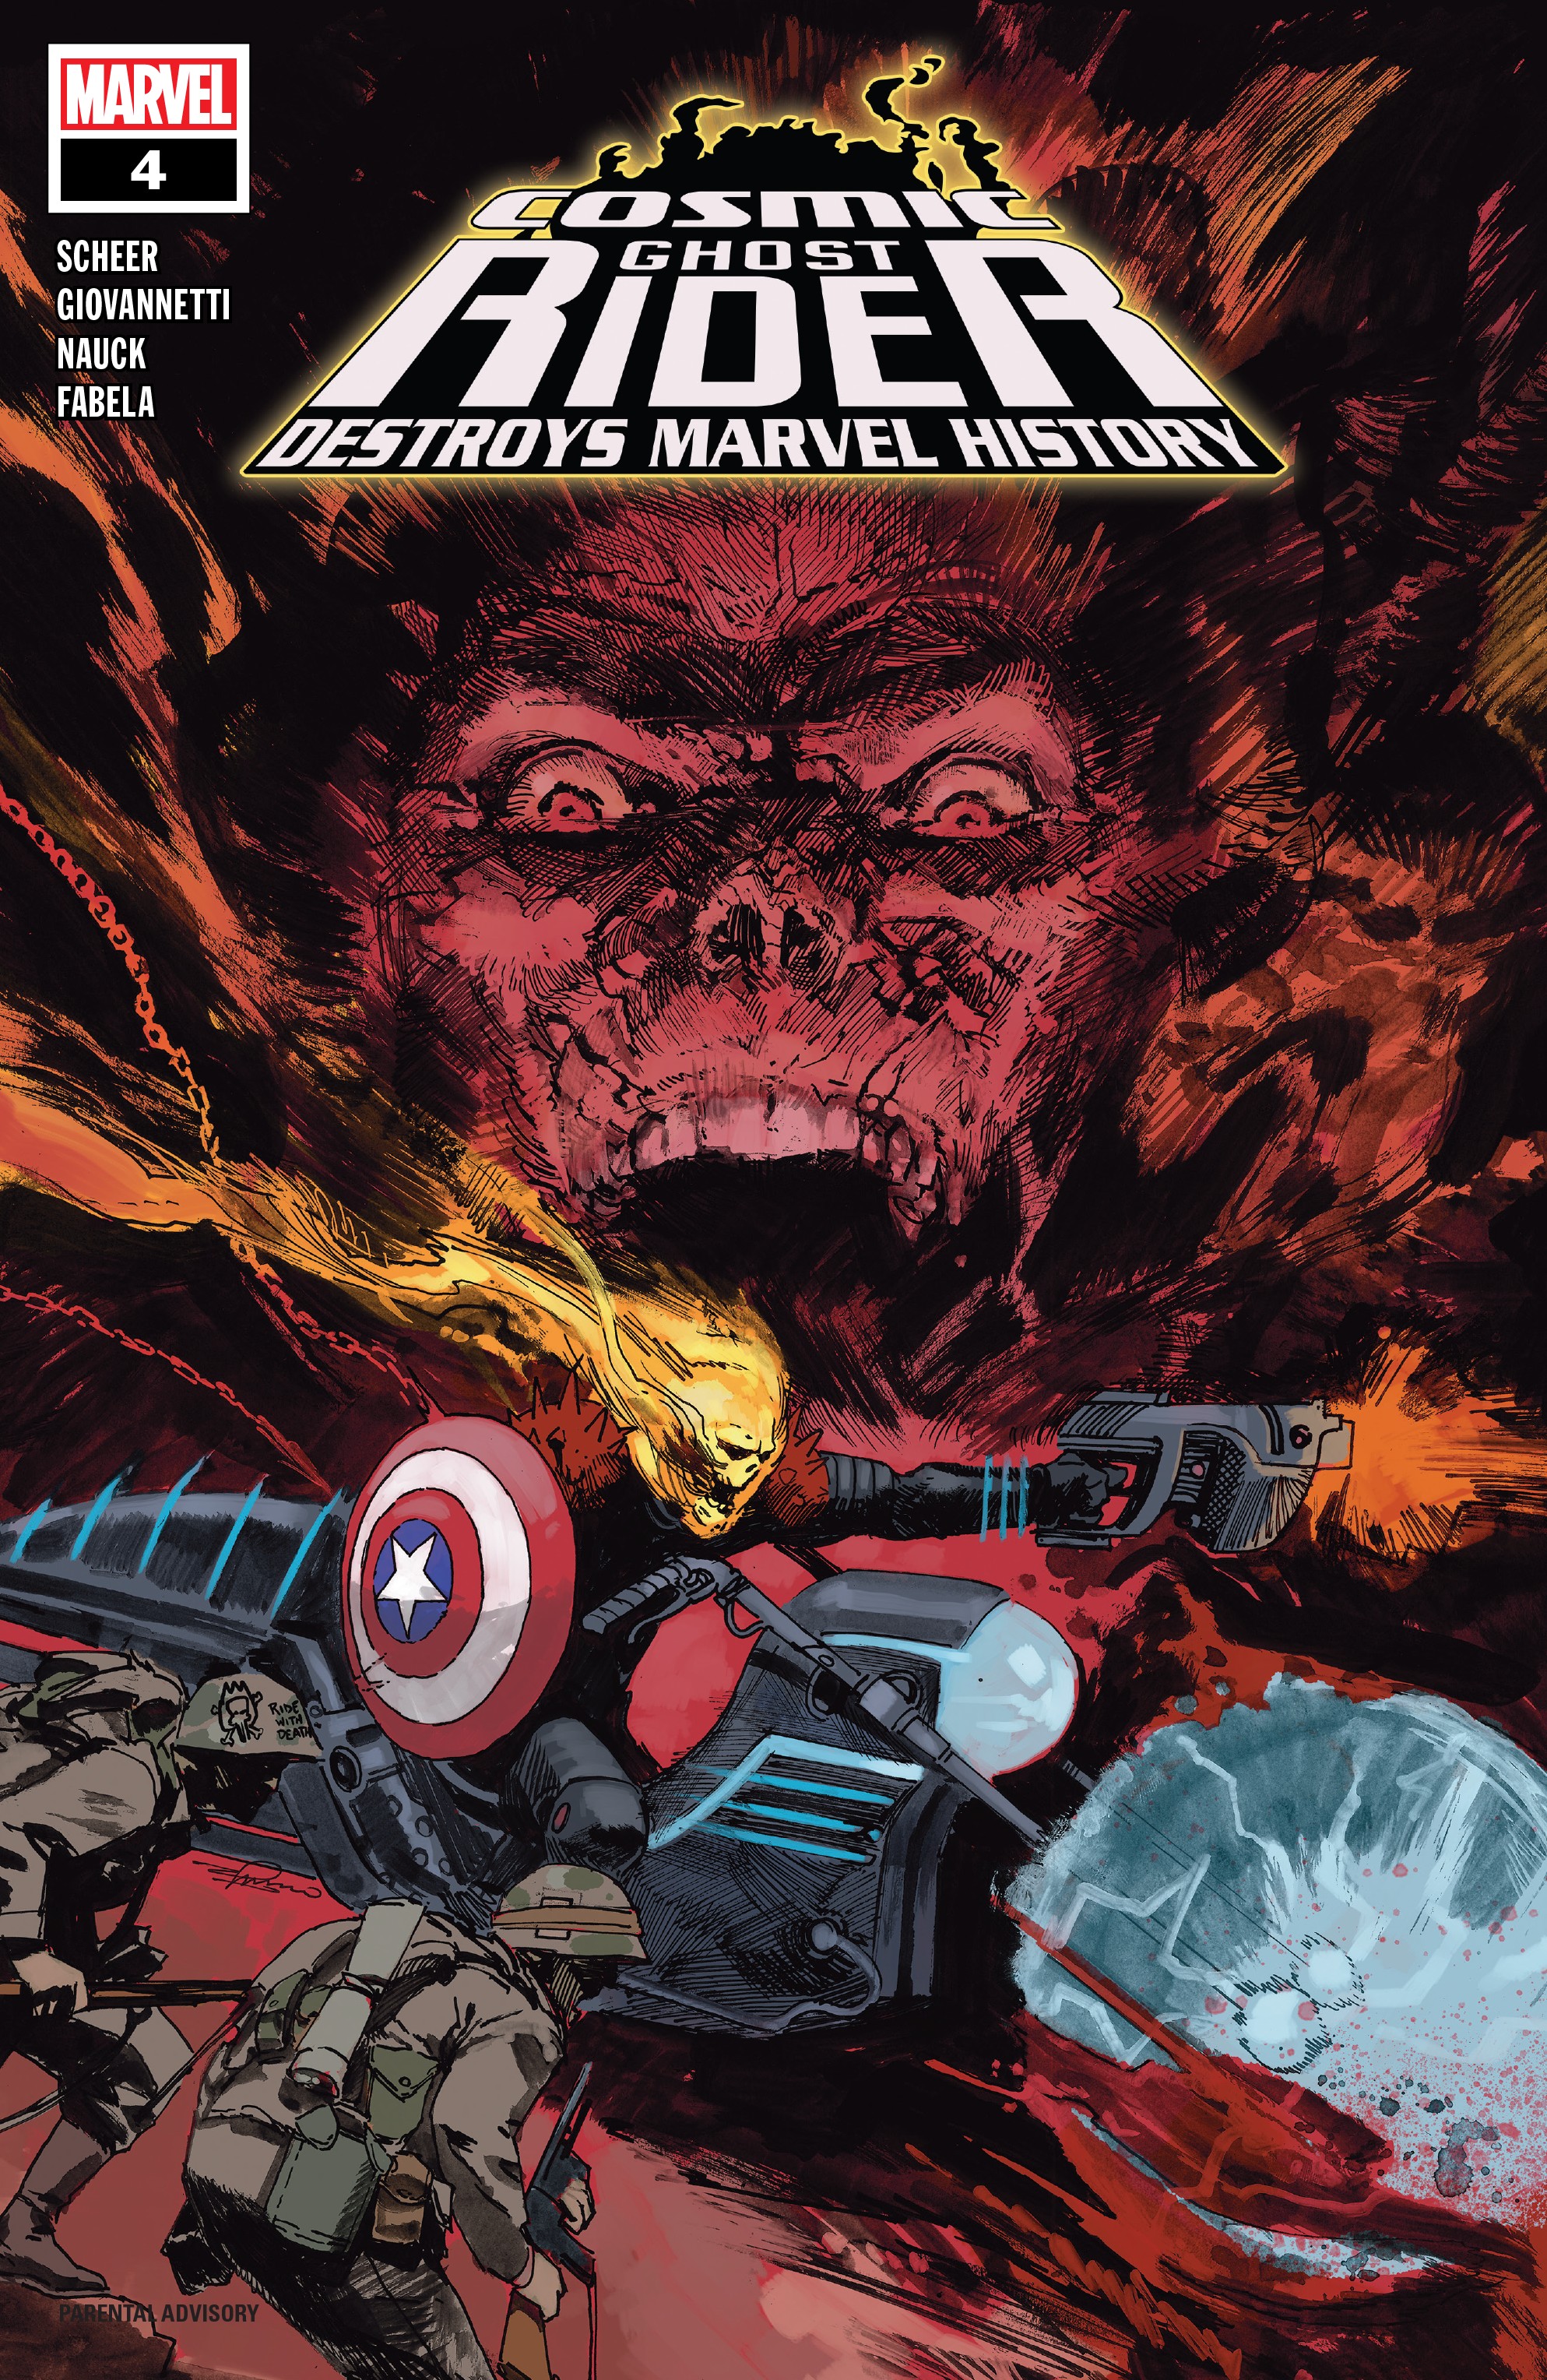 Read online Cosmic Ghost Rider Destroys Marvel History comic -  Issue #4 - 1